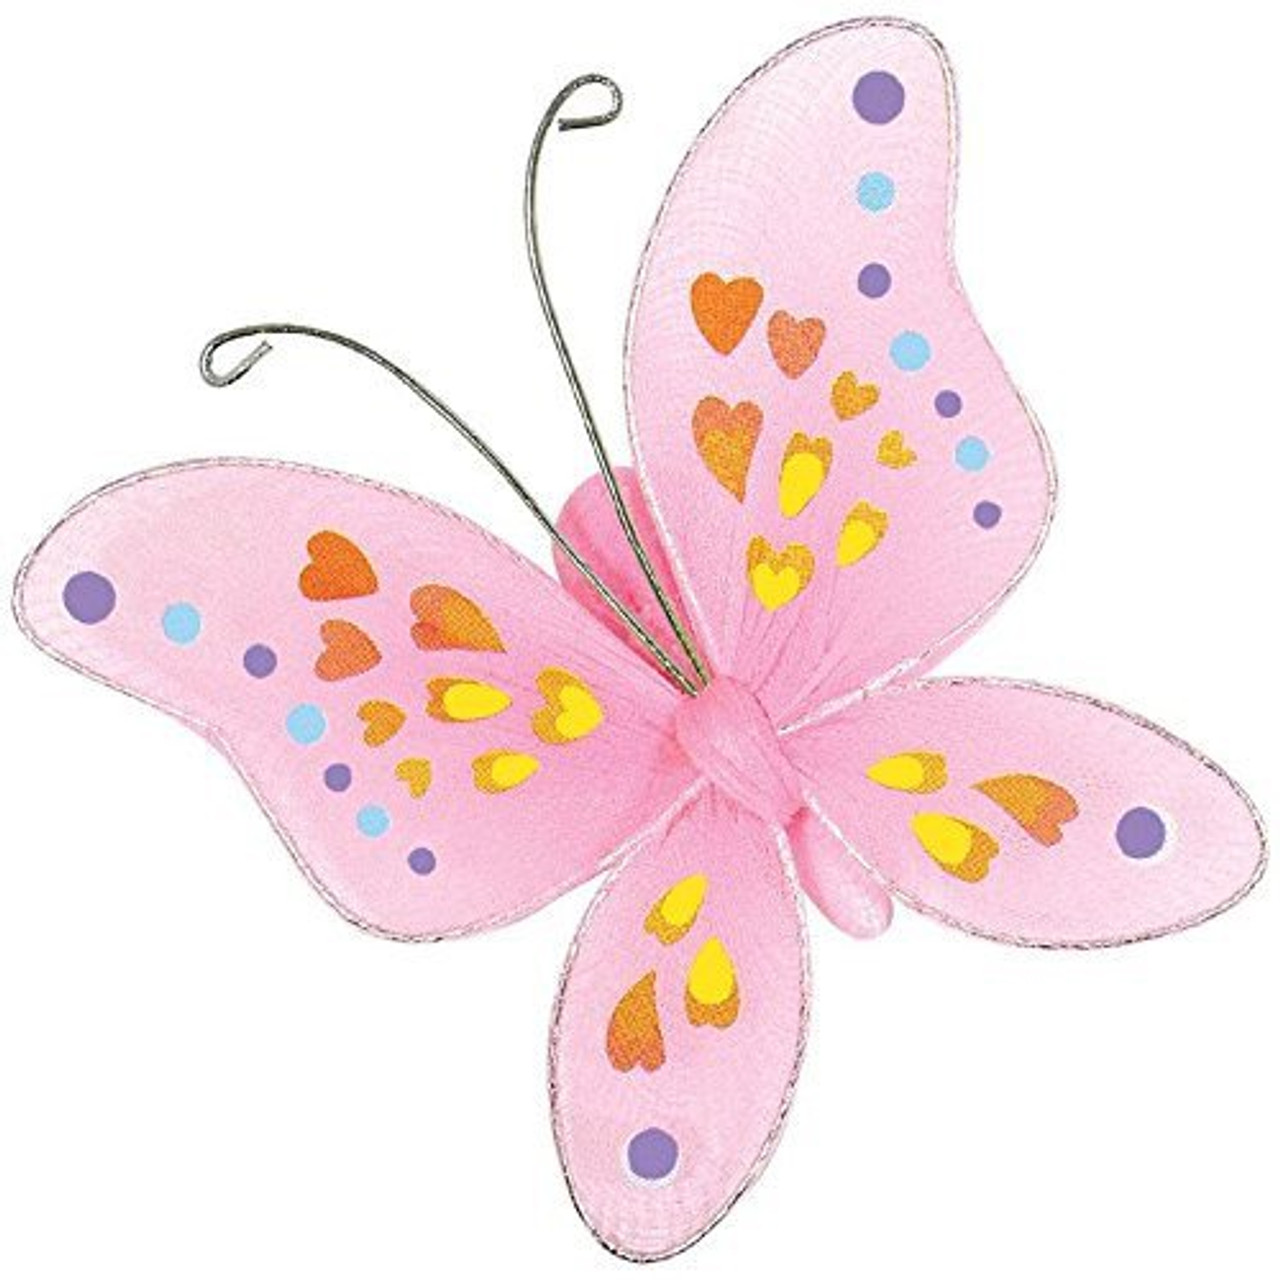 DECORATE YOUR OWN BUTTERFLY